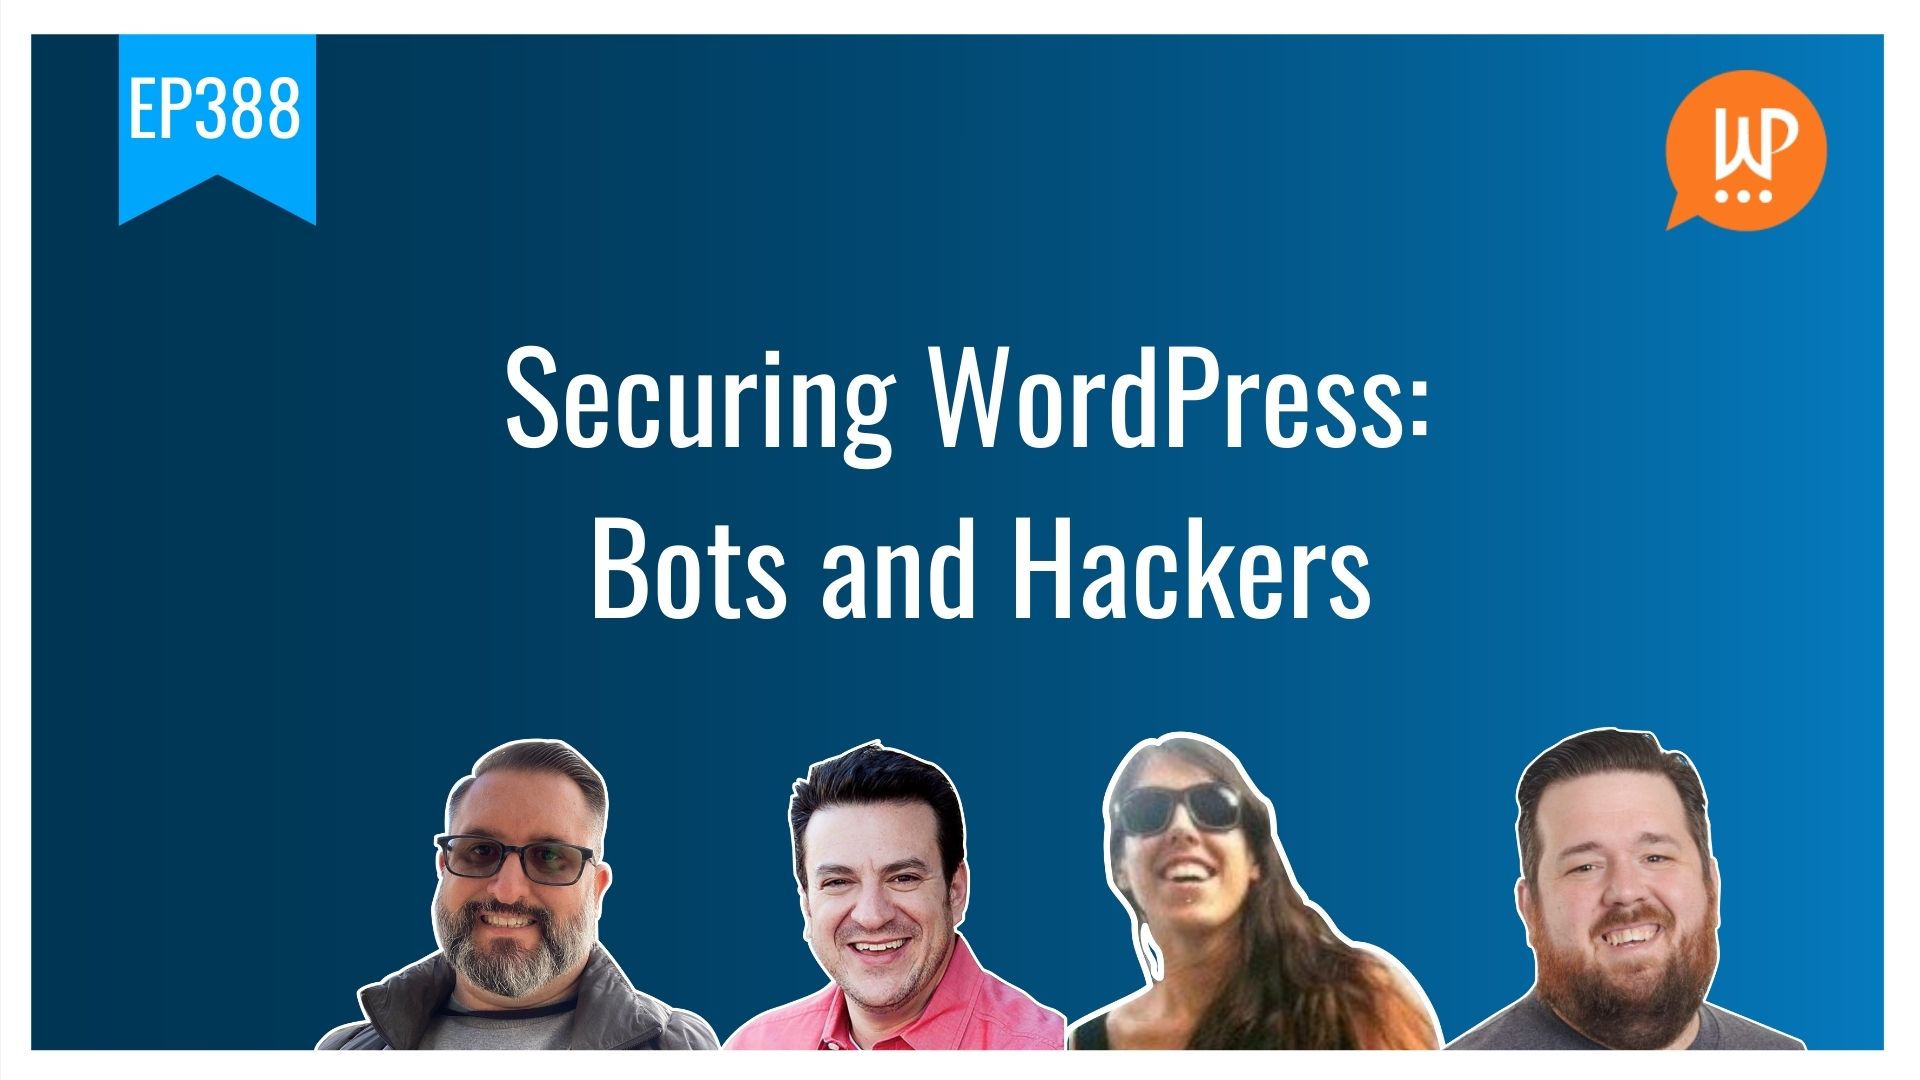 EP388 - Securing WordPress: Bots and Hackers